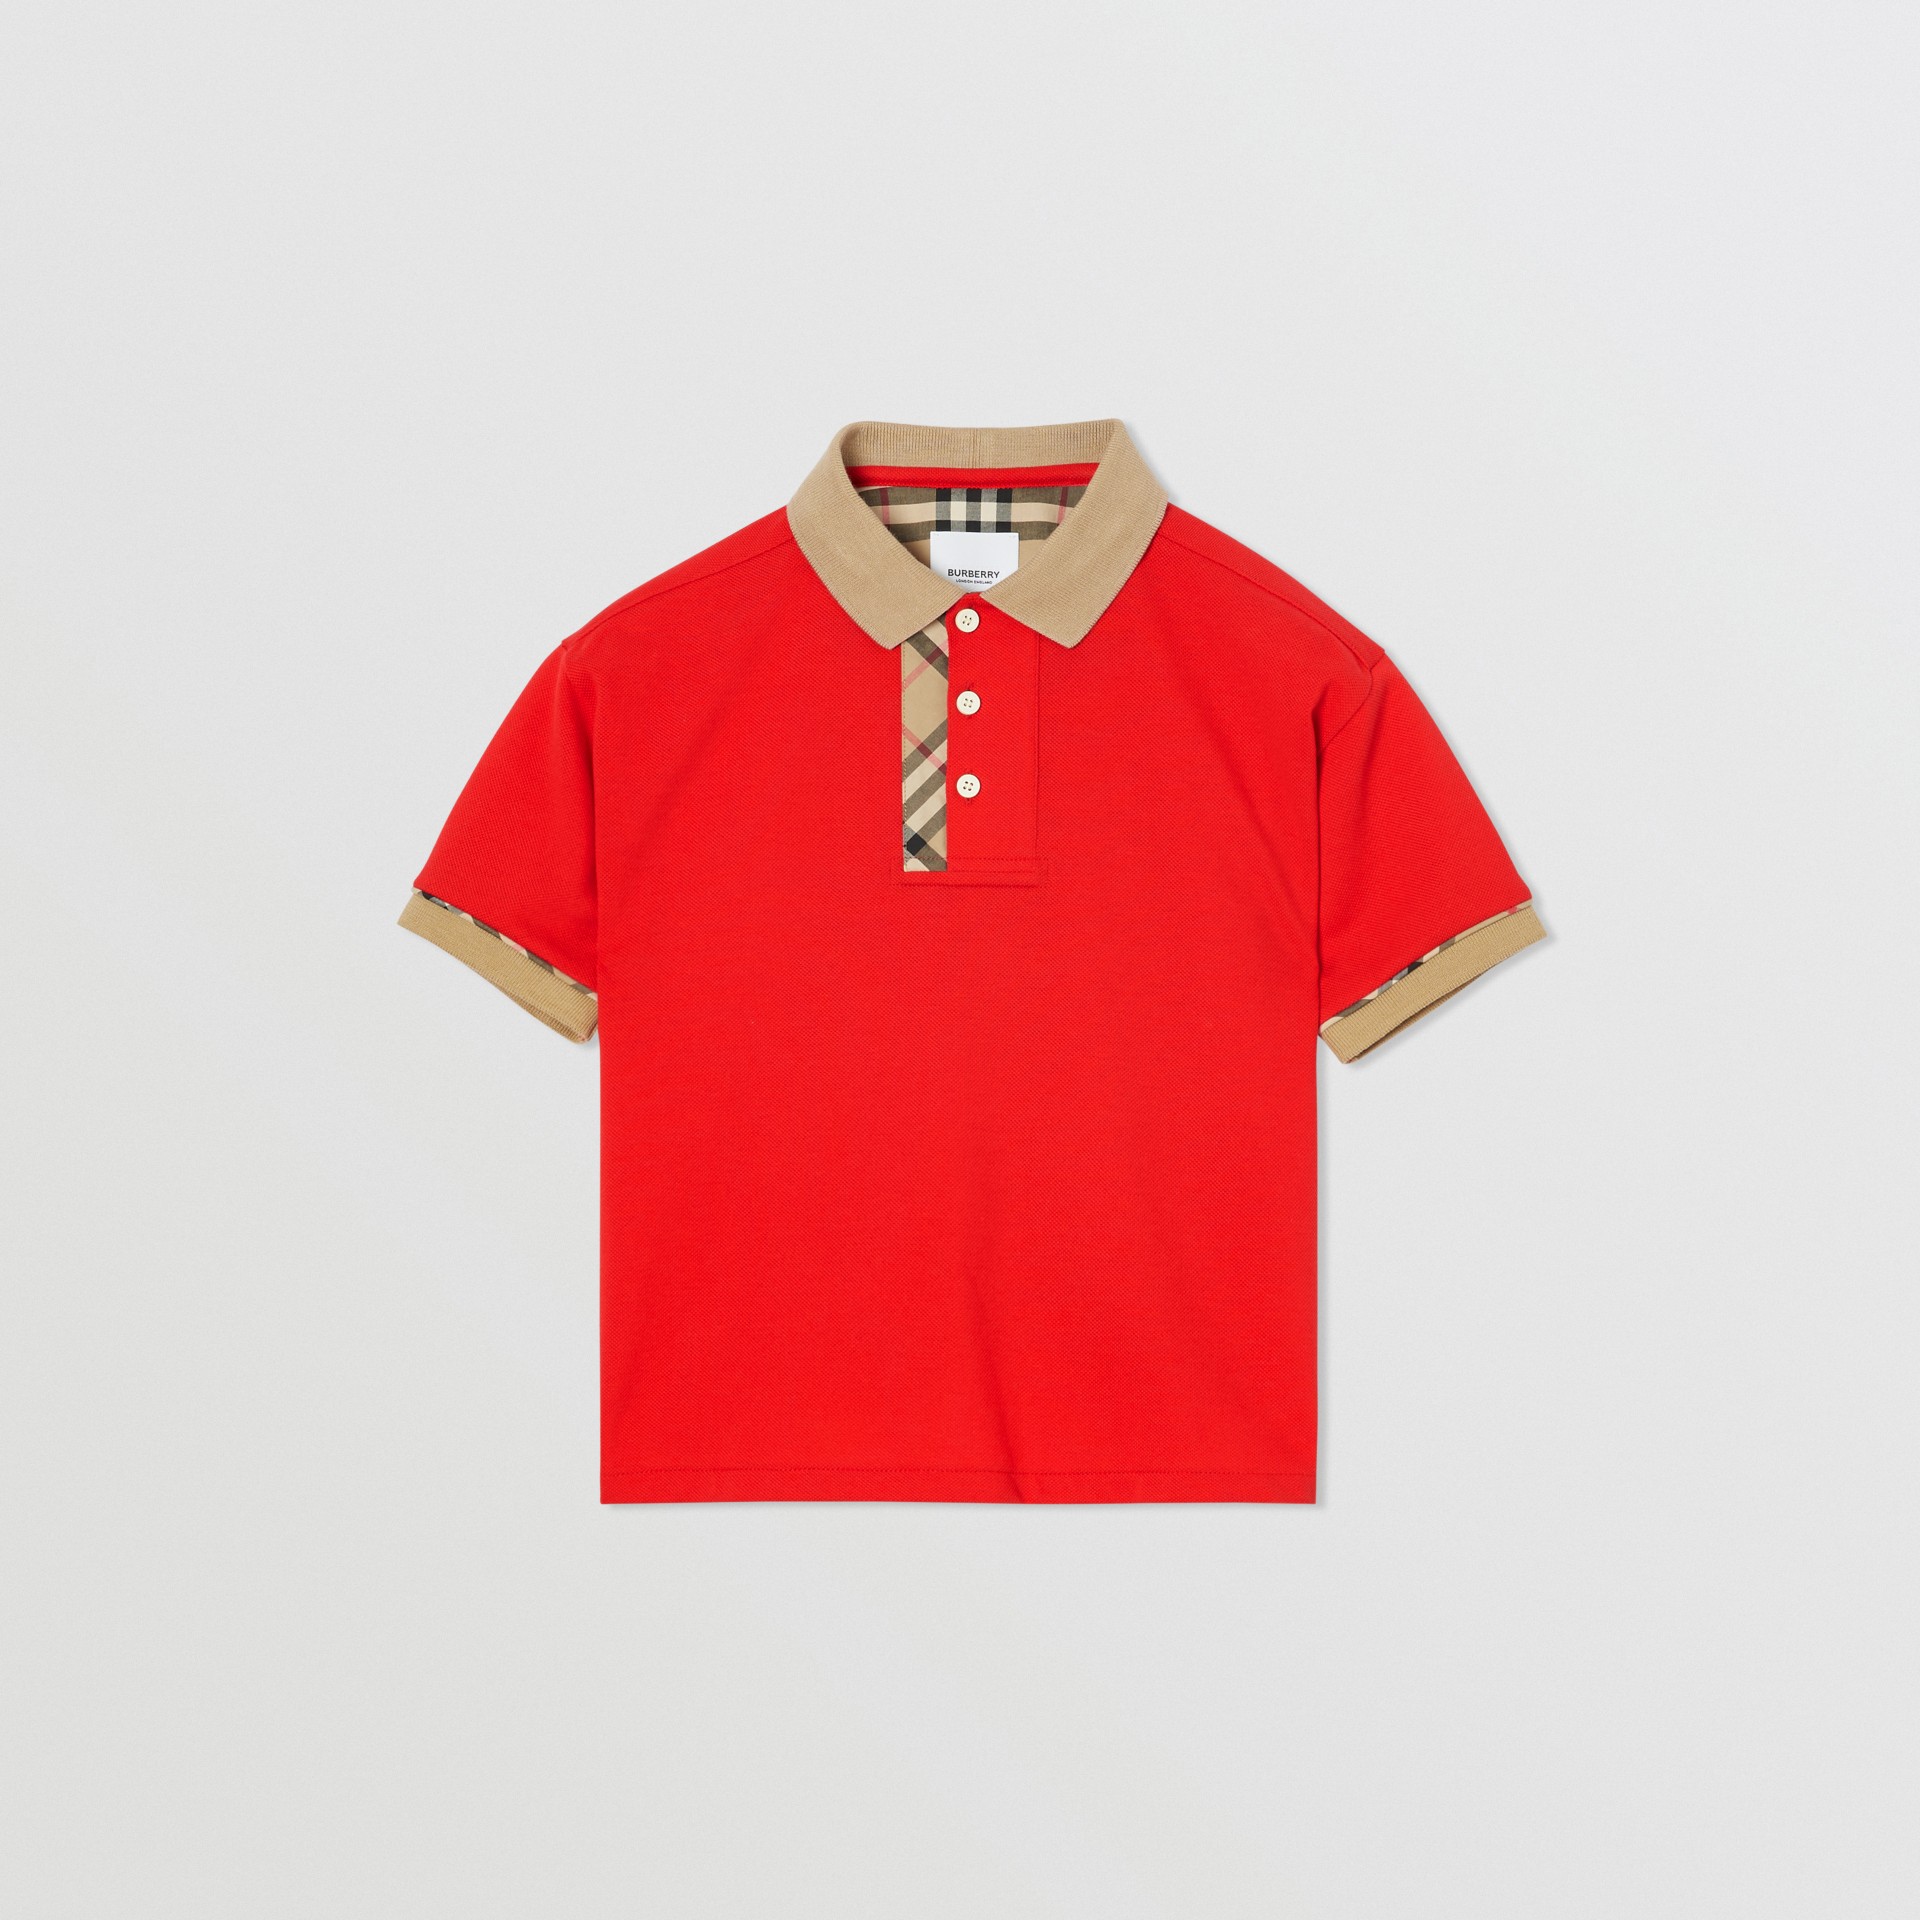 Vintage Check Trim Cotton Polo Shirt in Bright Red | Burberry United States